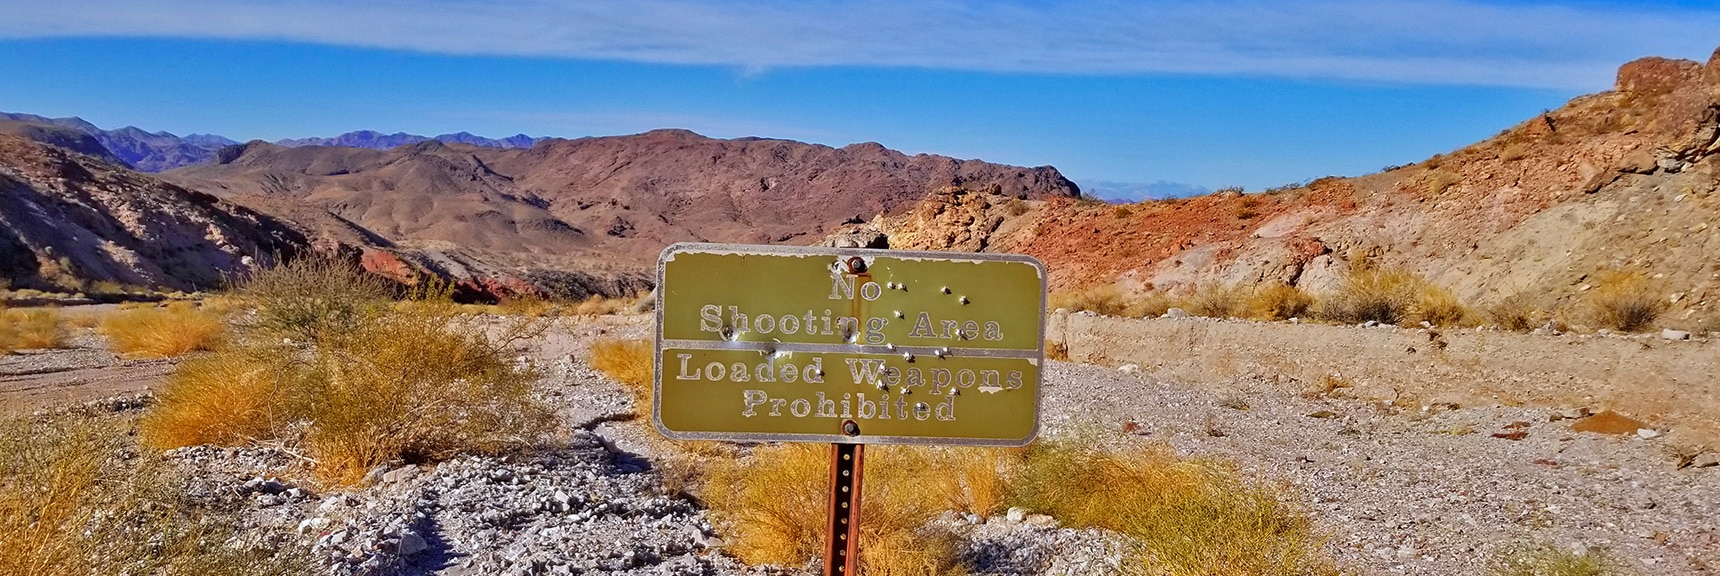 Bullet Riddled "No Shooting Allowed" Sign on Fortification Hill Rd. | Fortification Hill | Lake Mead National Recreation Area, Arizona